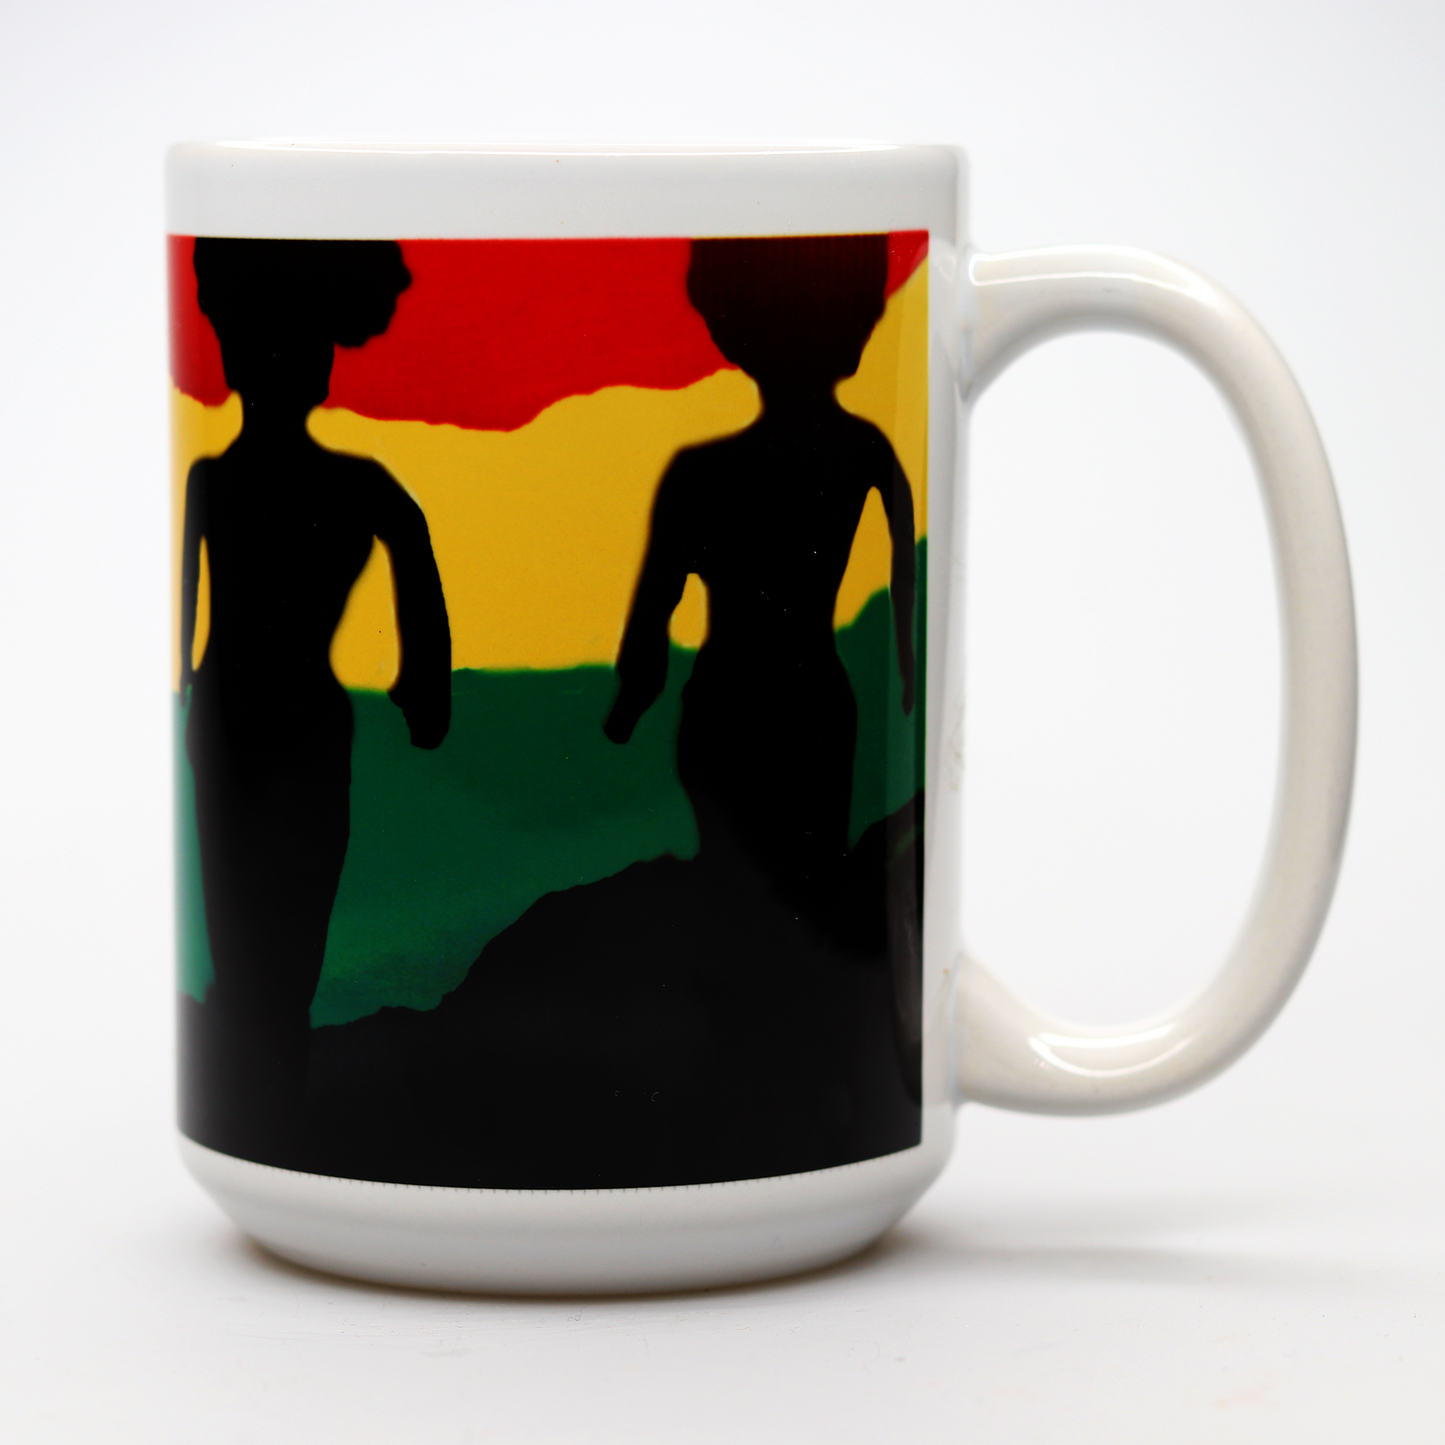 CC15 351 African American women in black silhouette walking through red, black, green and yellow clouds.